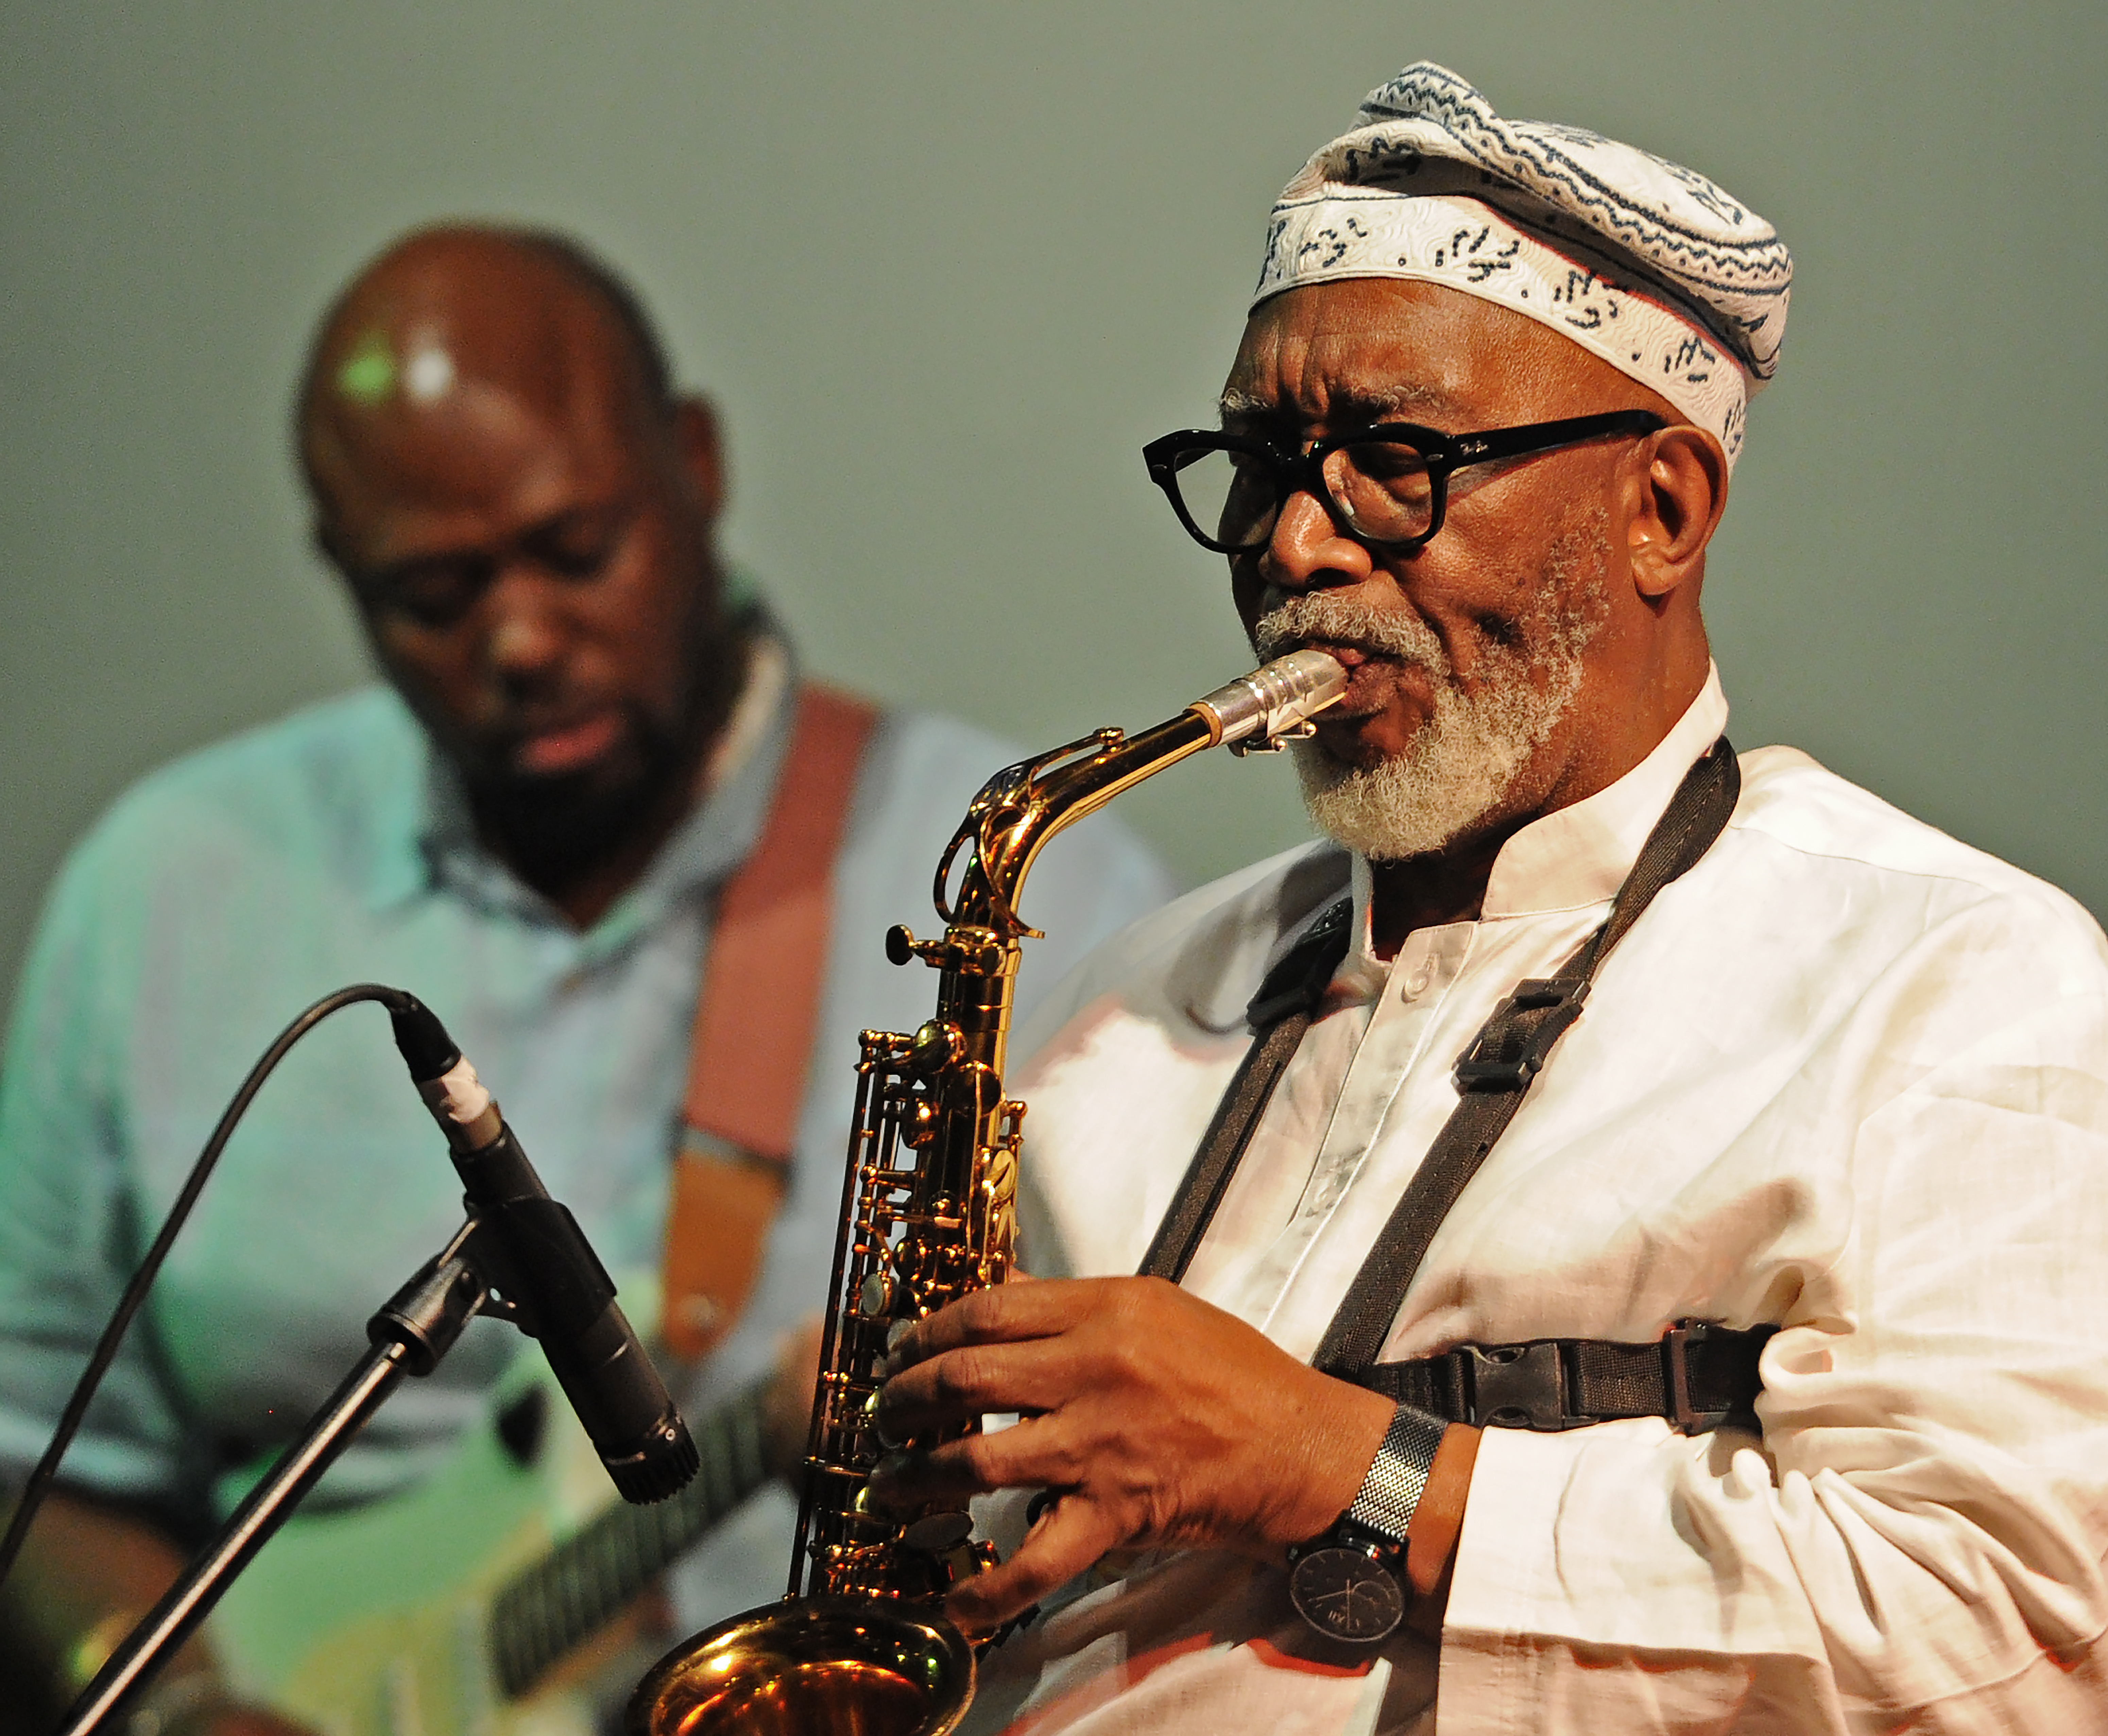 The legendary multi-instrumentalist Sipho "Hotstix" Mabuse performs at the Leano Restaurant as he continued with his 71st birthday celebrations on November 11, 2022 in Johannesburg, South Africa. Image: Gallo Images / City Press / Tebogo Letsie